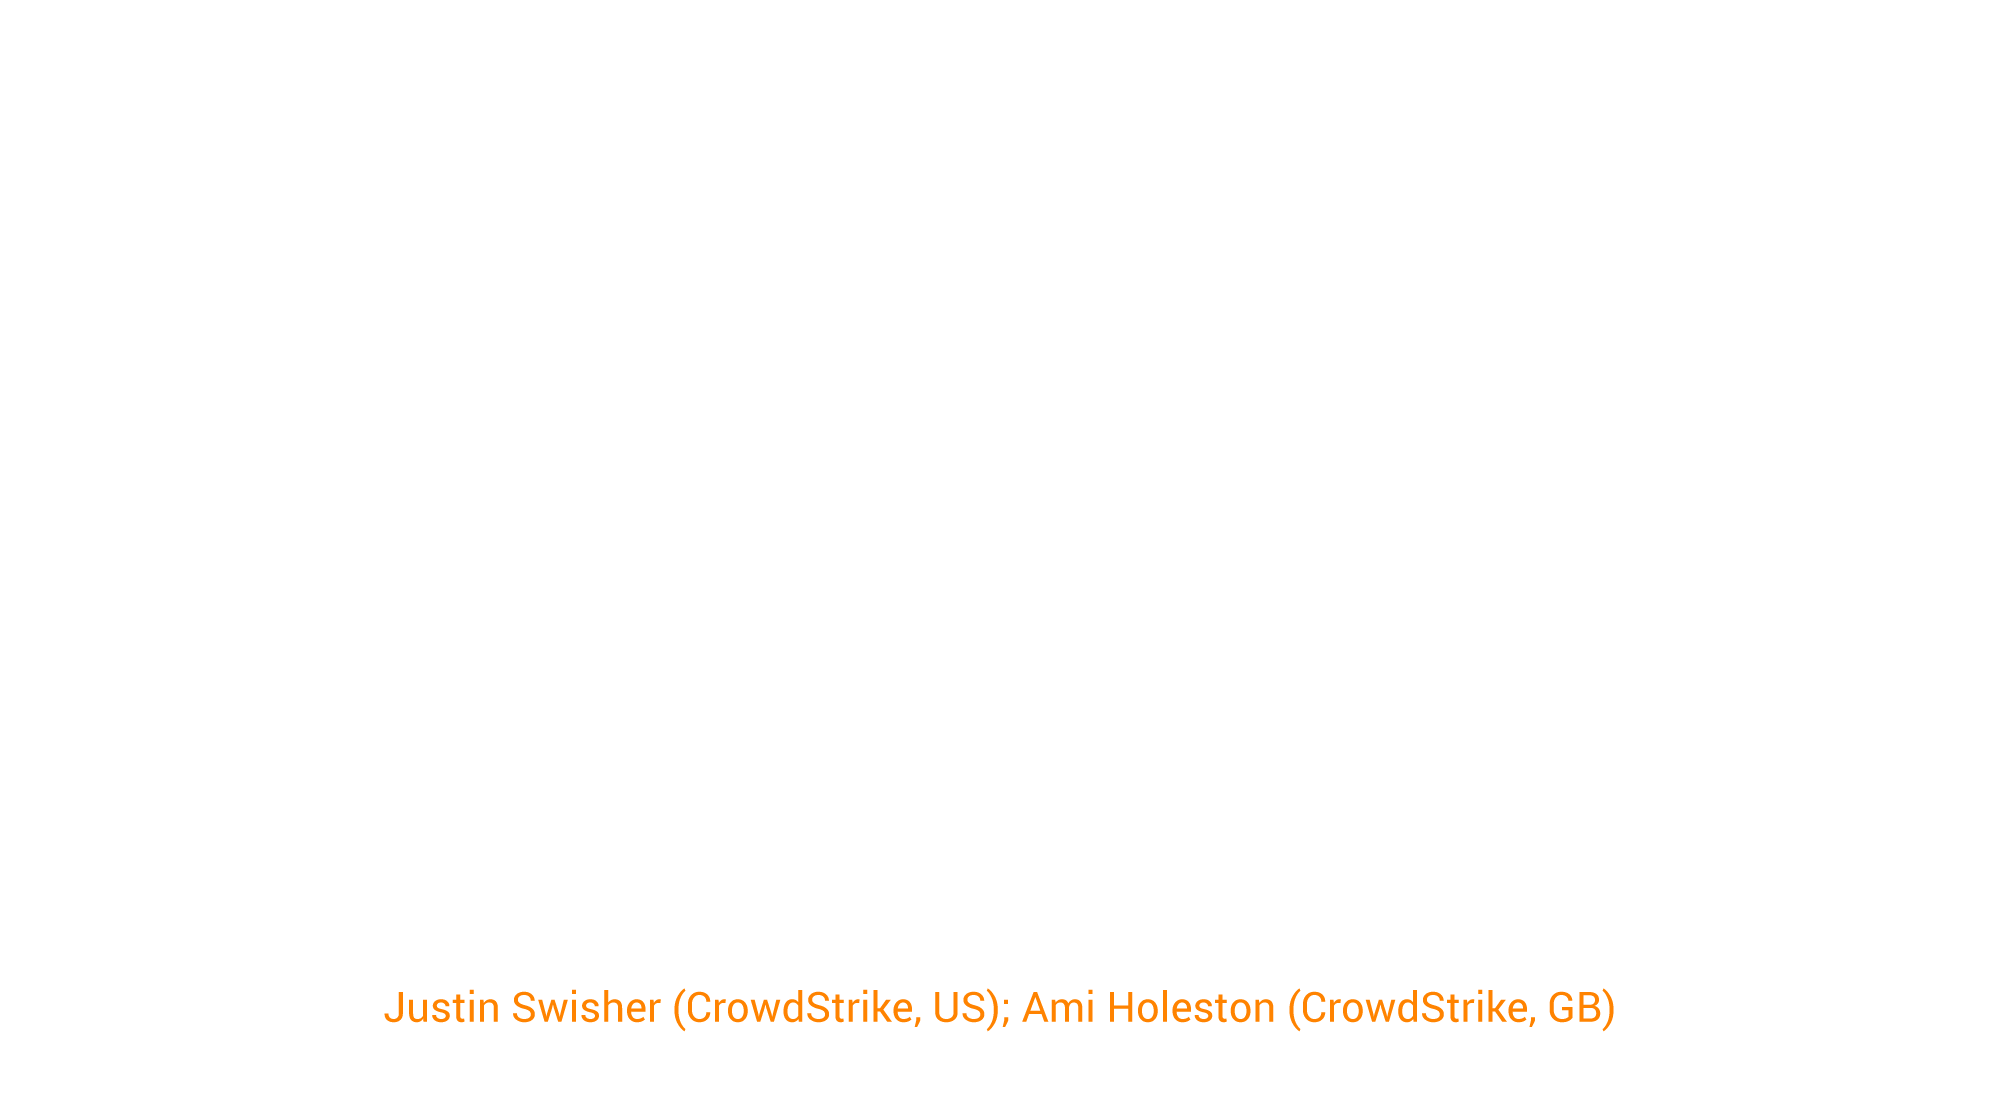 Enhancing Operations Through the Tracking of Interactive Linux-based Intrusion Campaigns